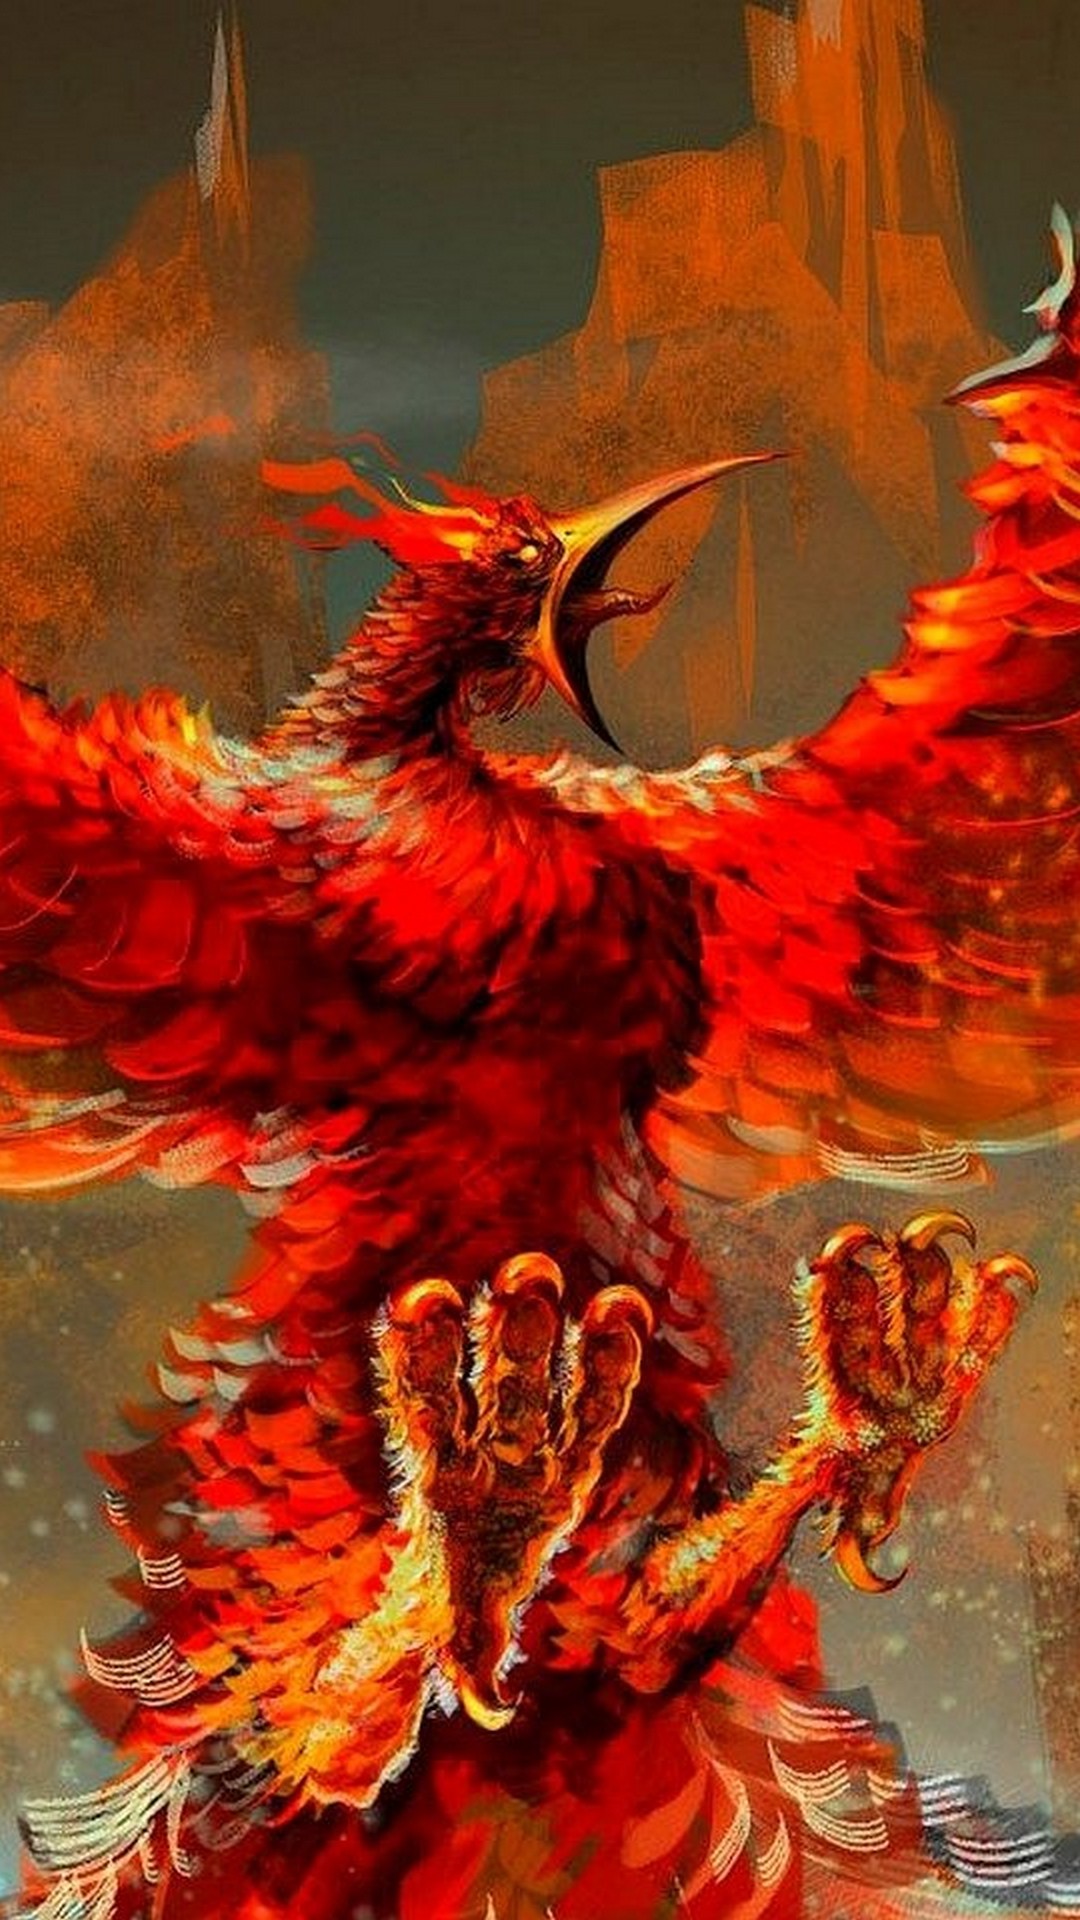 Phoenix Images Wallpaper Android with resolution 1080X1920 pixel. You can make this wallpaper for your Android backgrounds, Tablet, Smartphones Screensavers and Mobile Phone Lock Screen